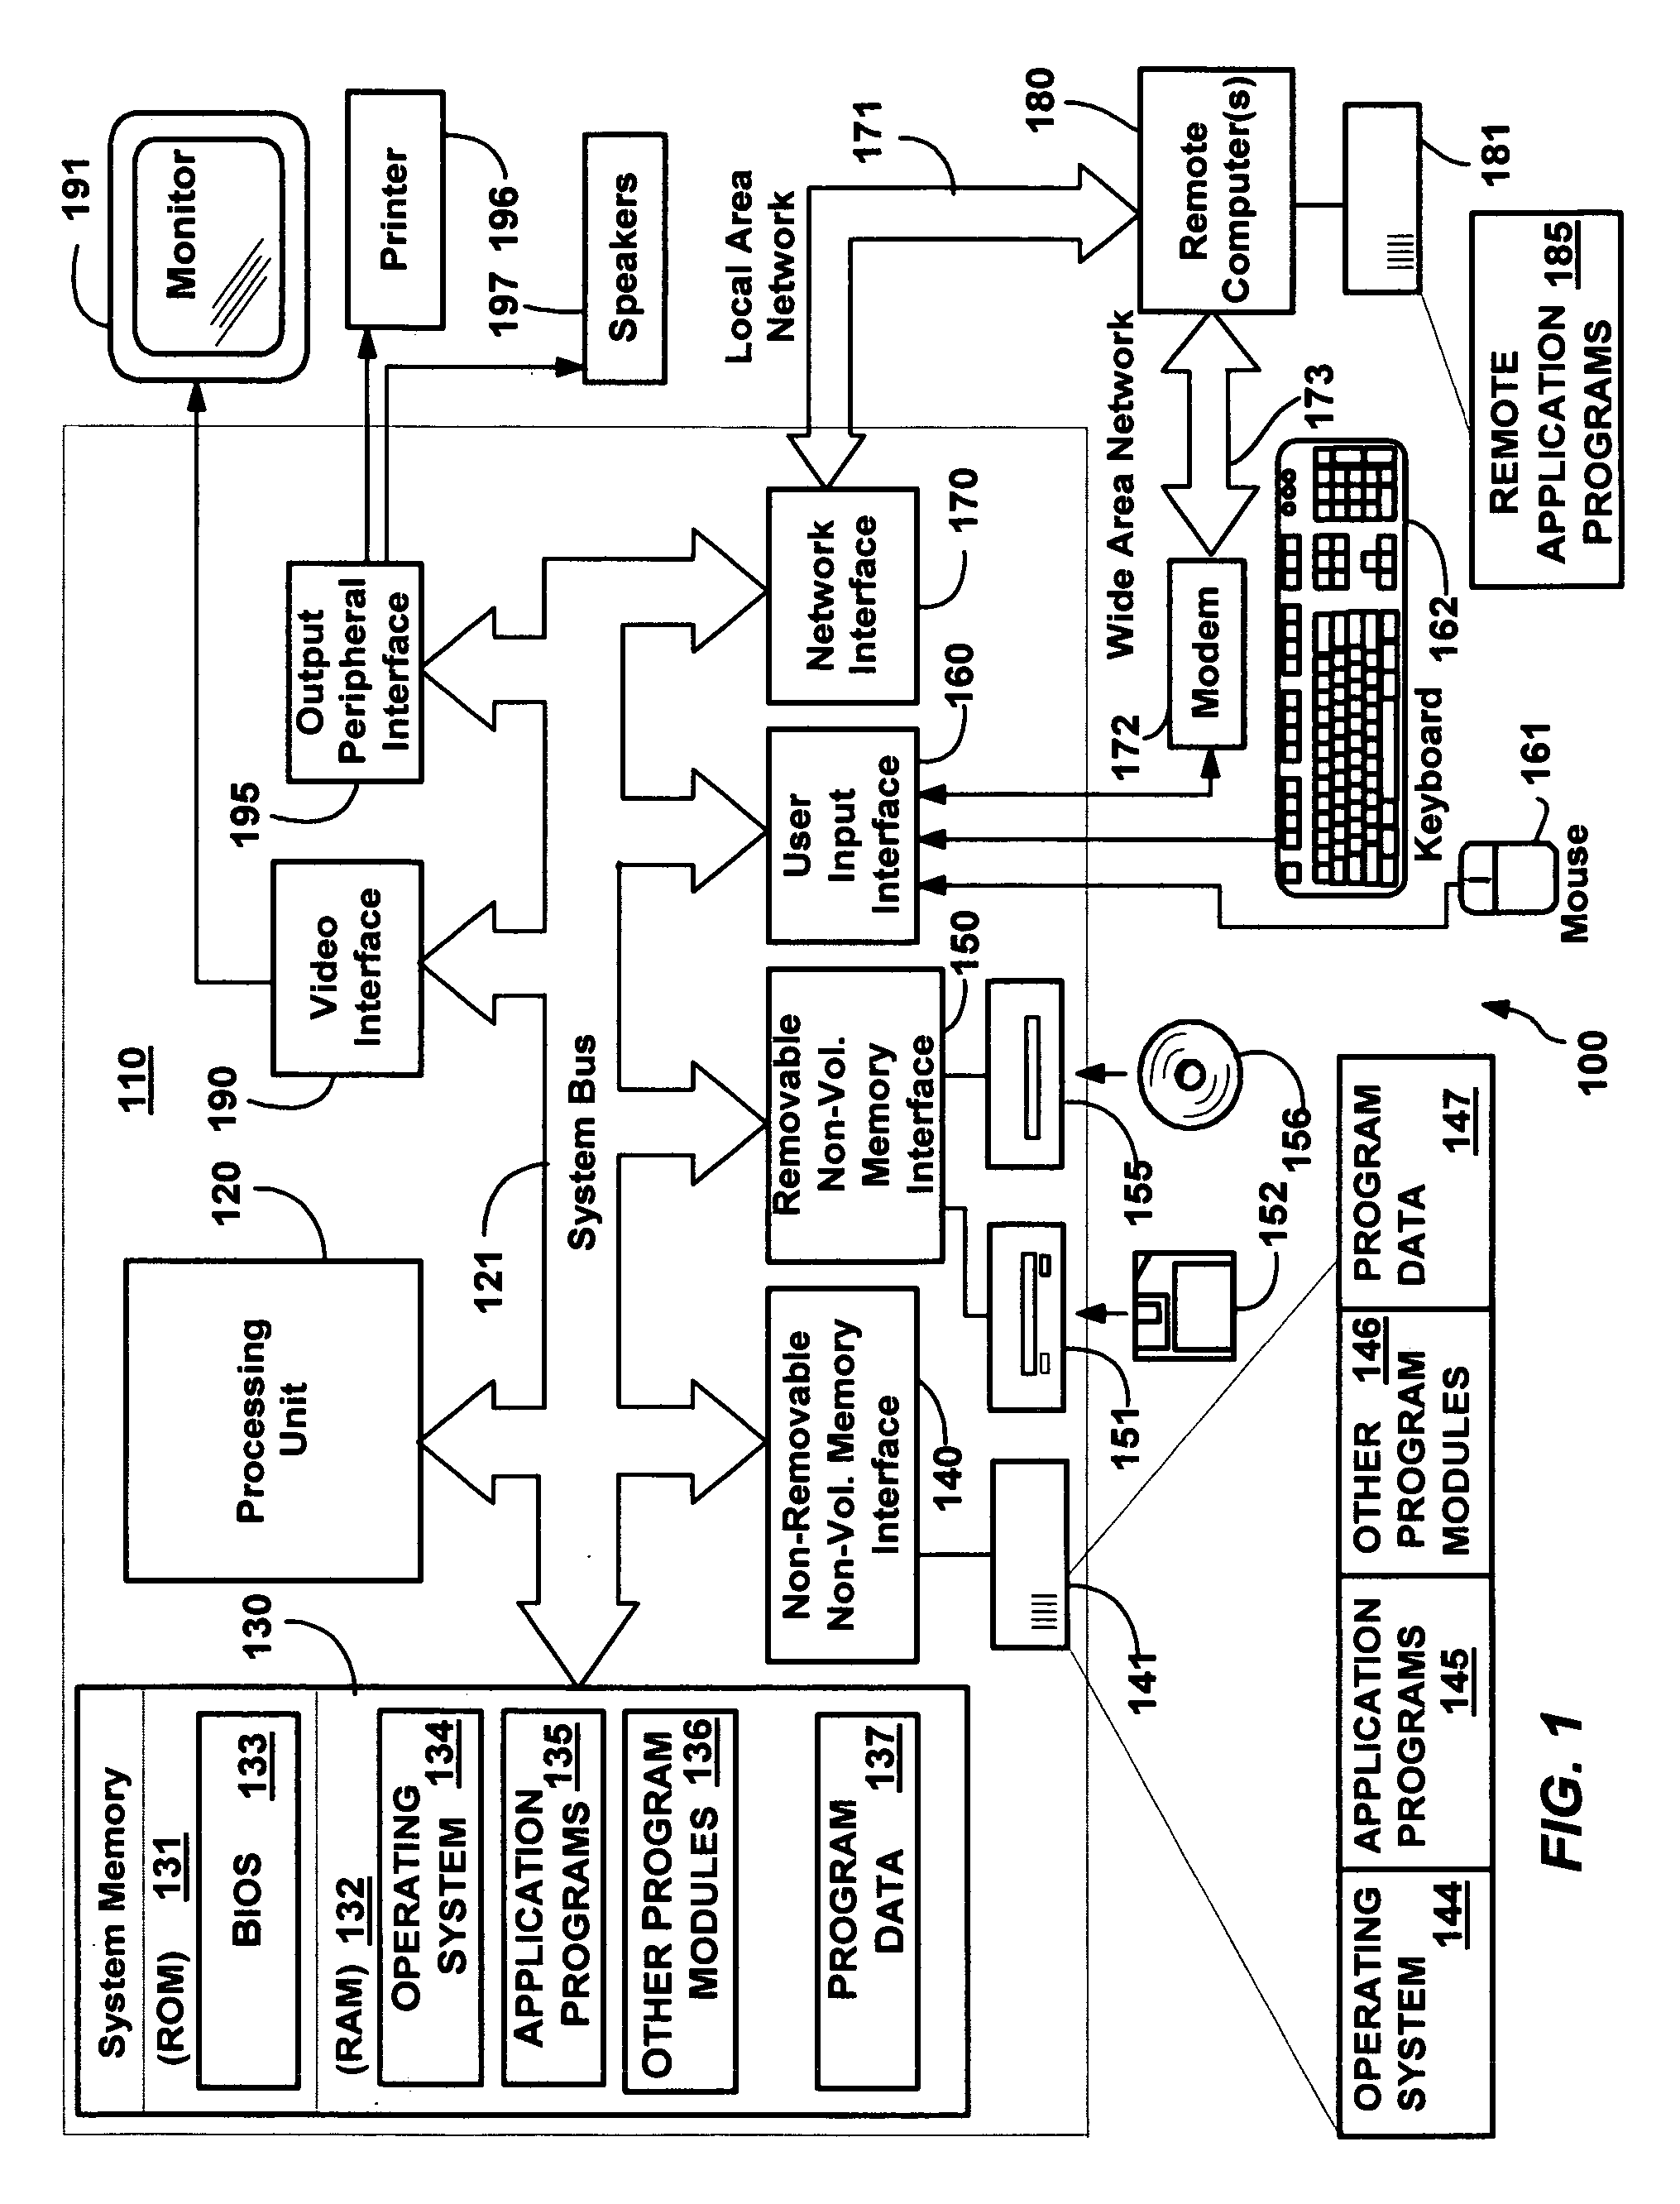 Method and system for representing and displaying digital ink